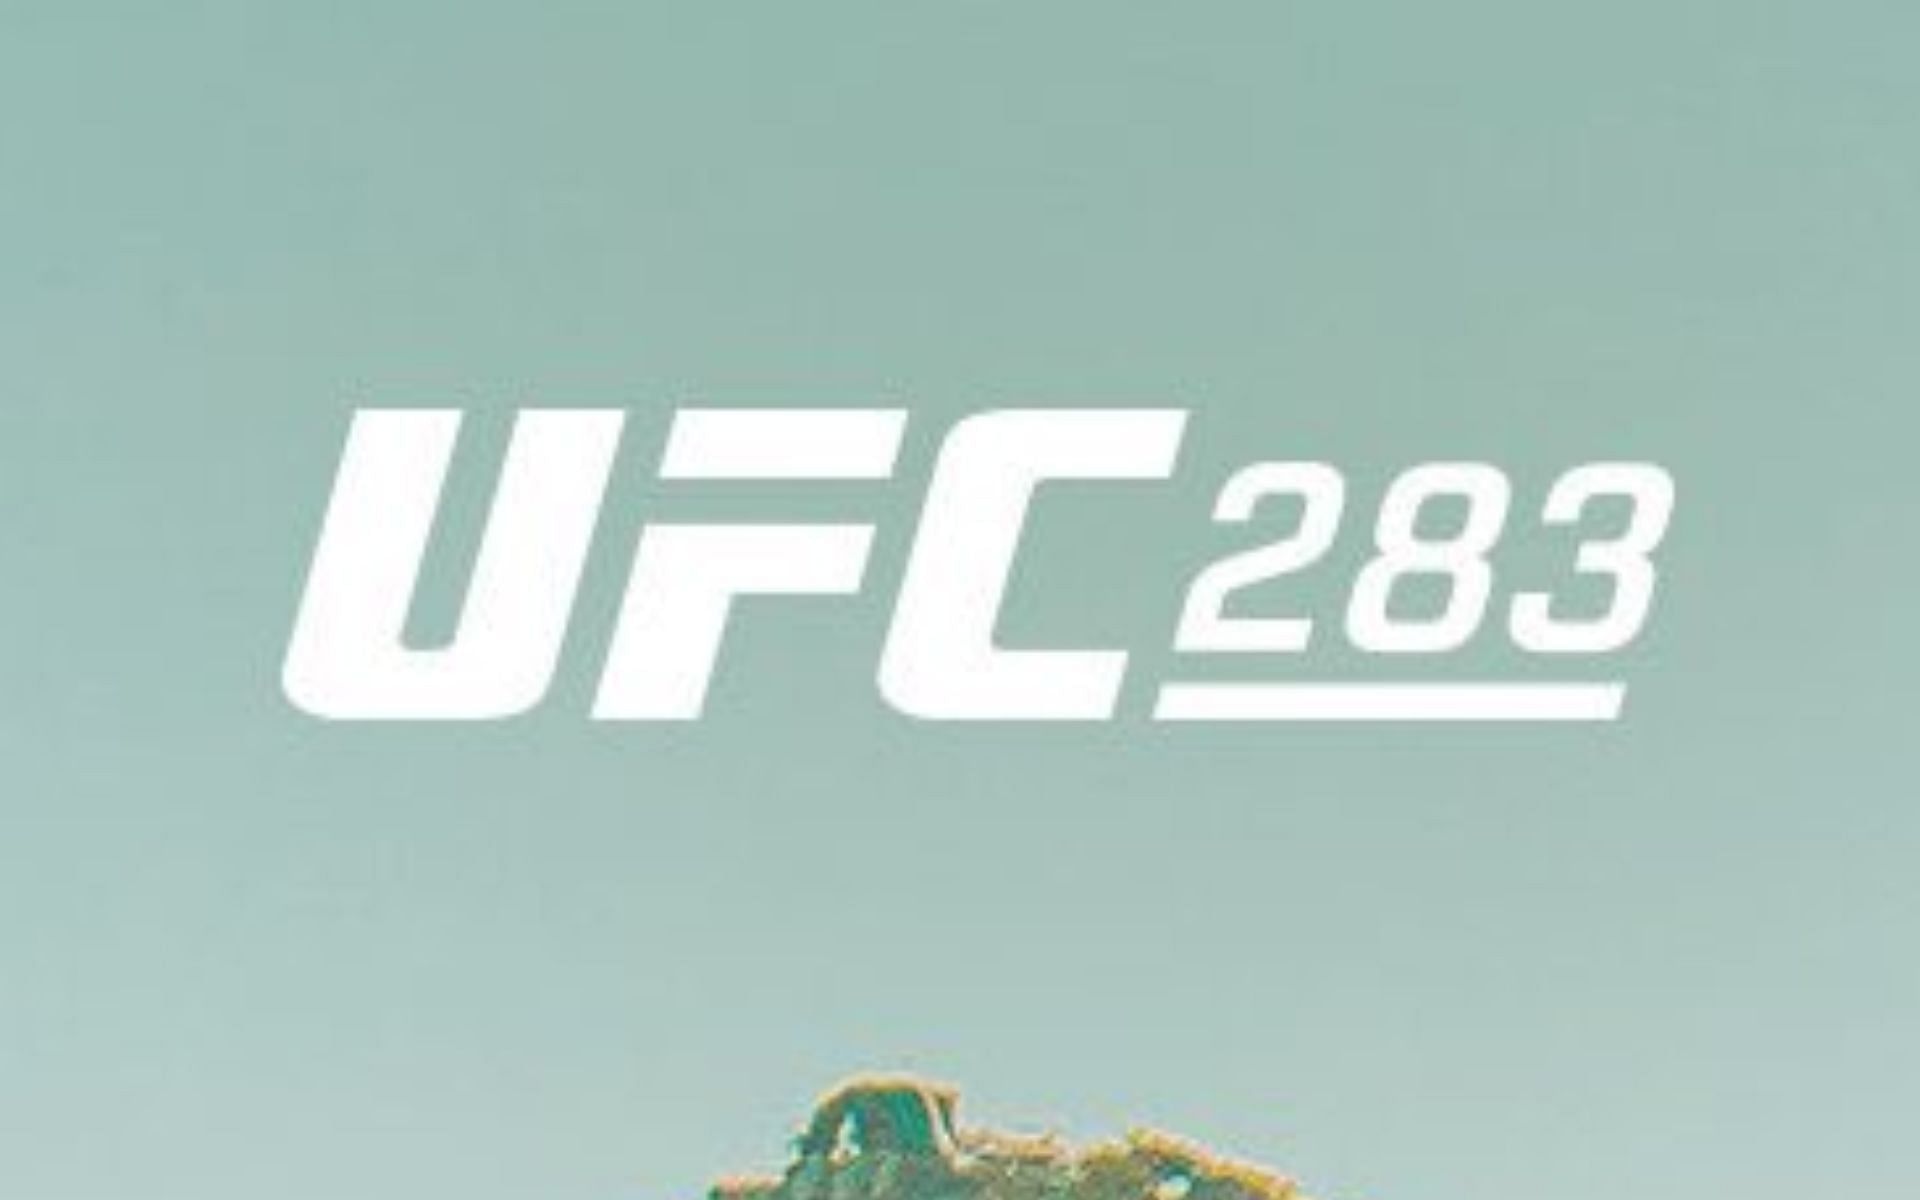 UFC 283 [Images courtesy of @The_MMA_Media on Twitter]